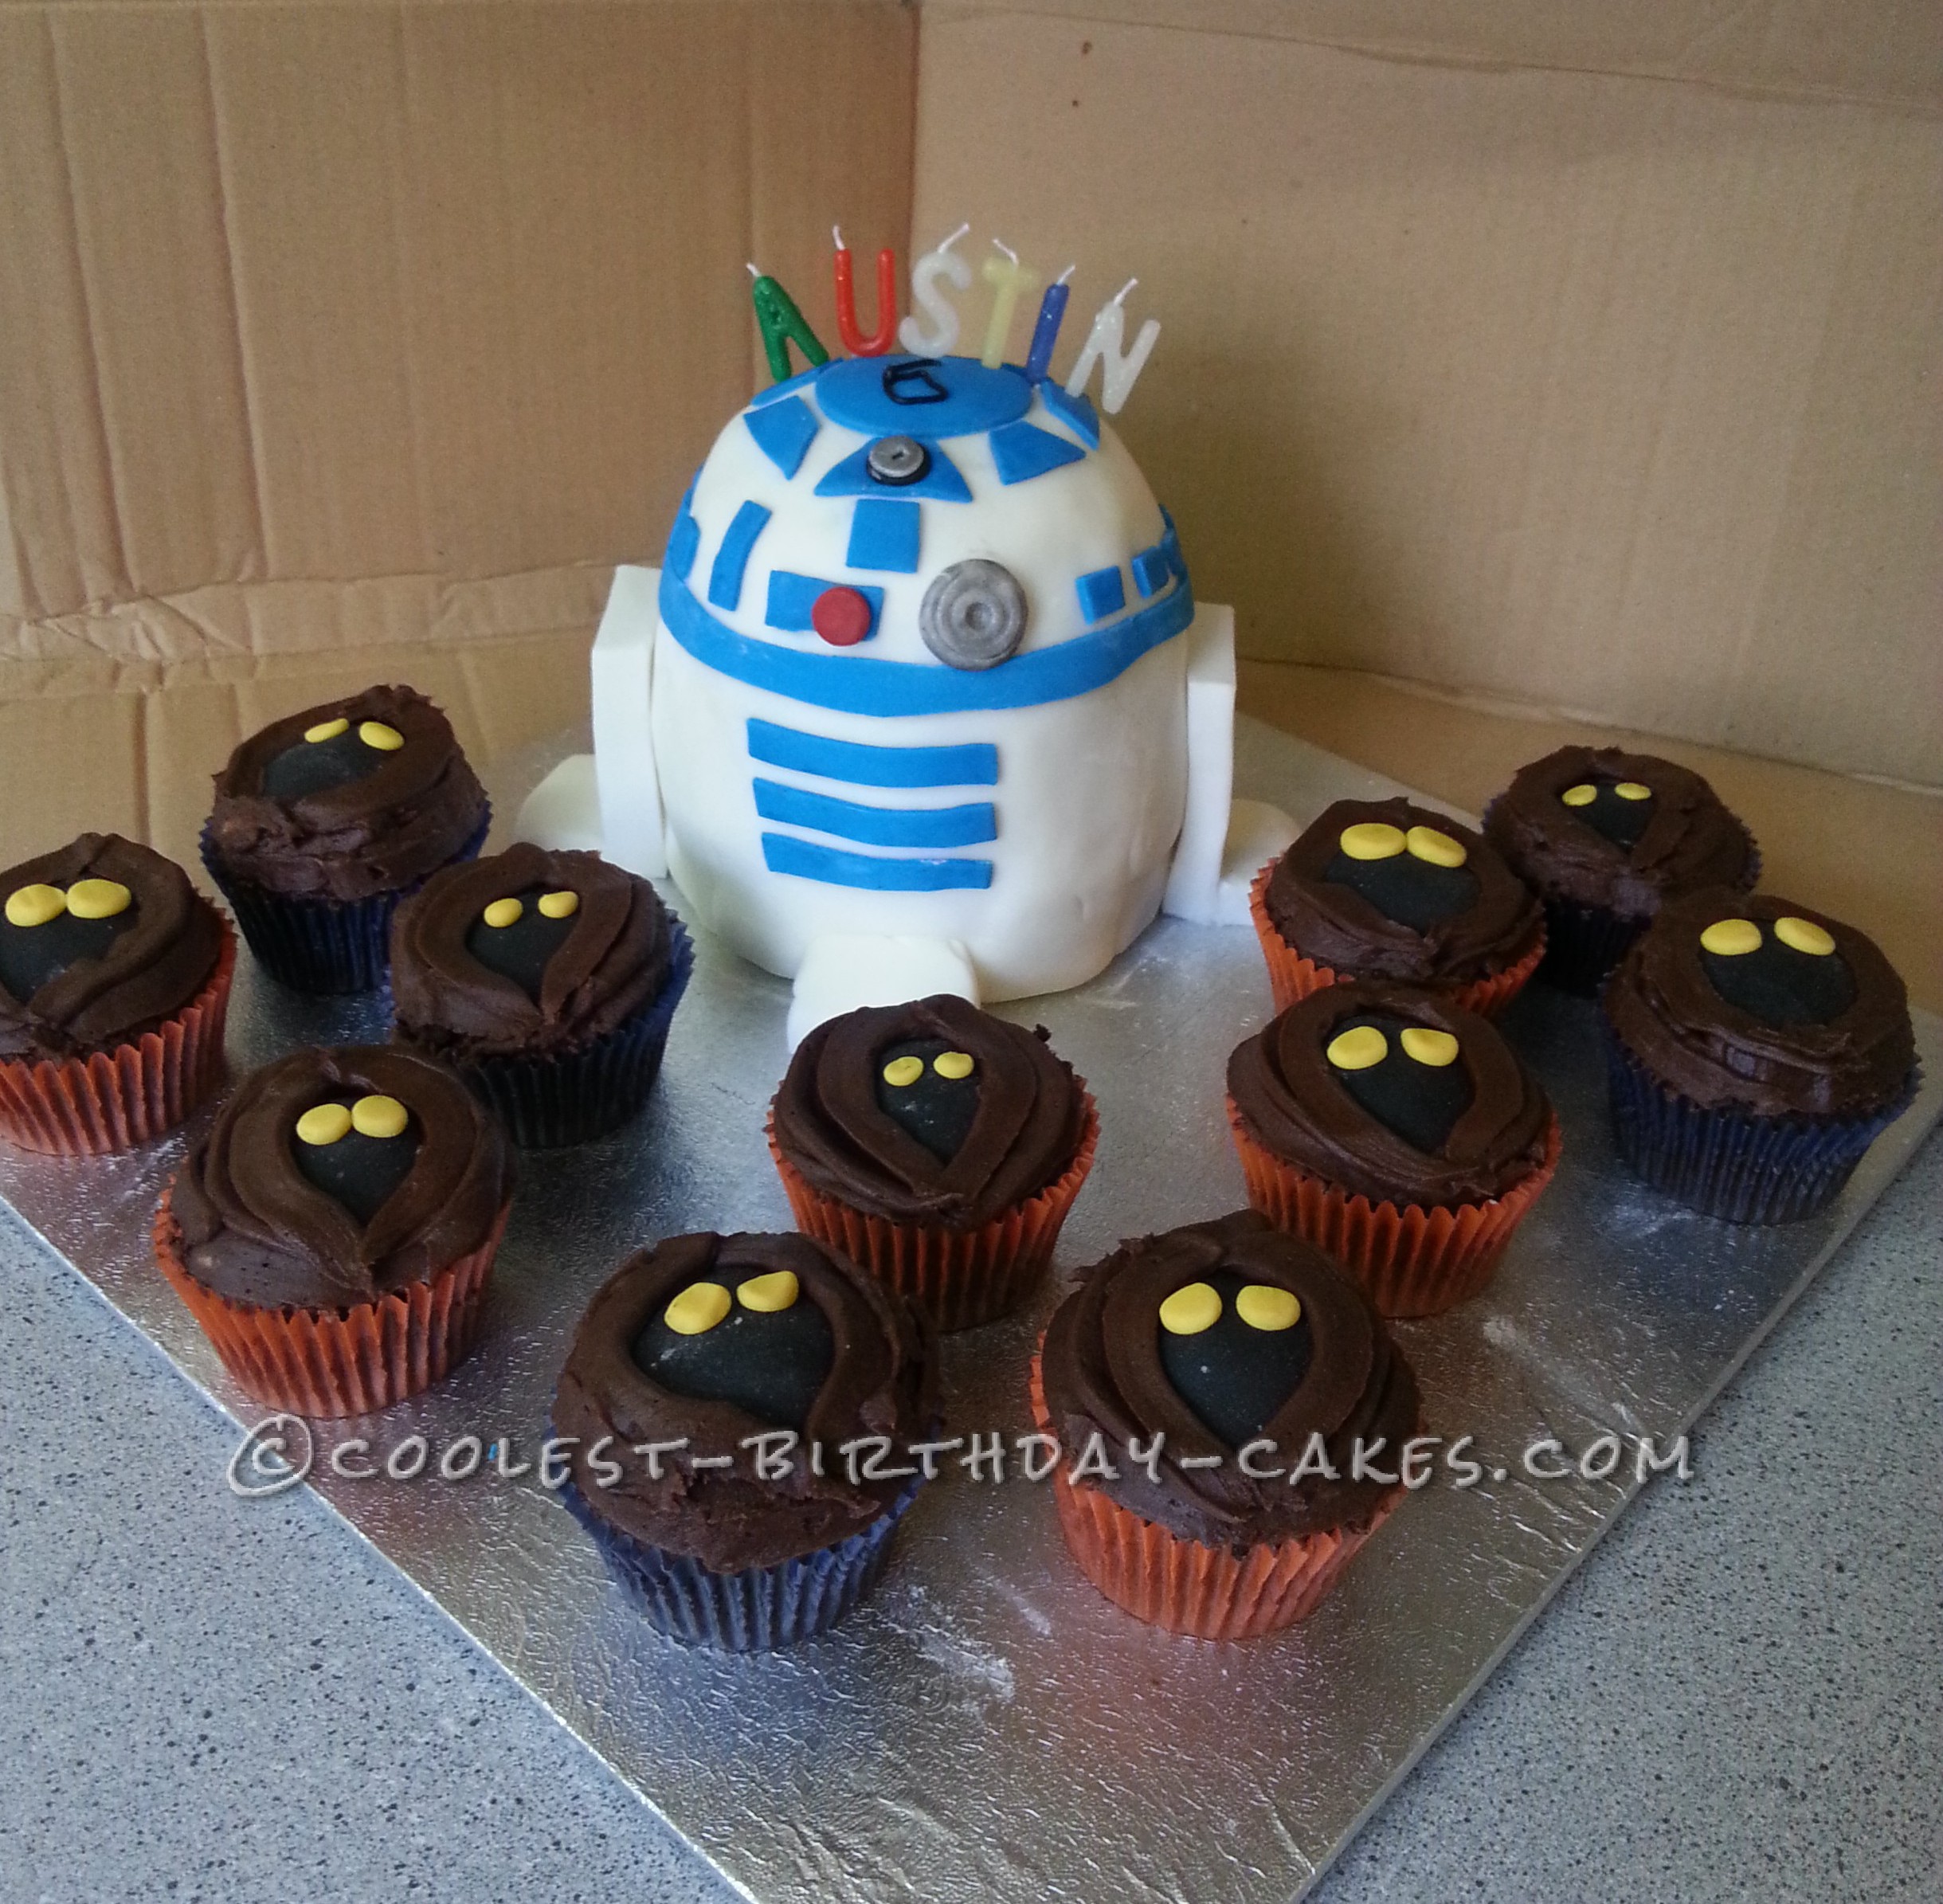 Coolest R2D2 Birthday Cake with Jawas